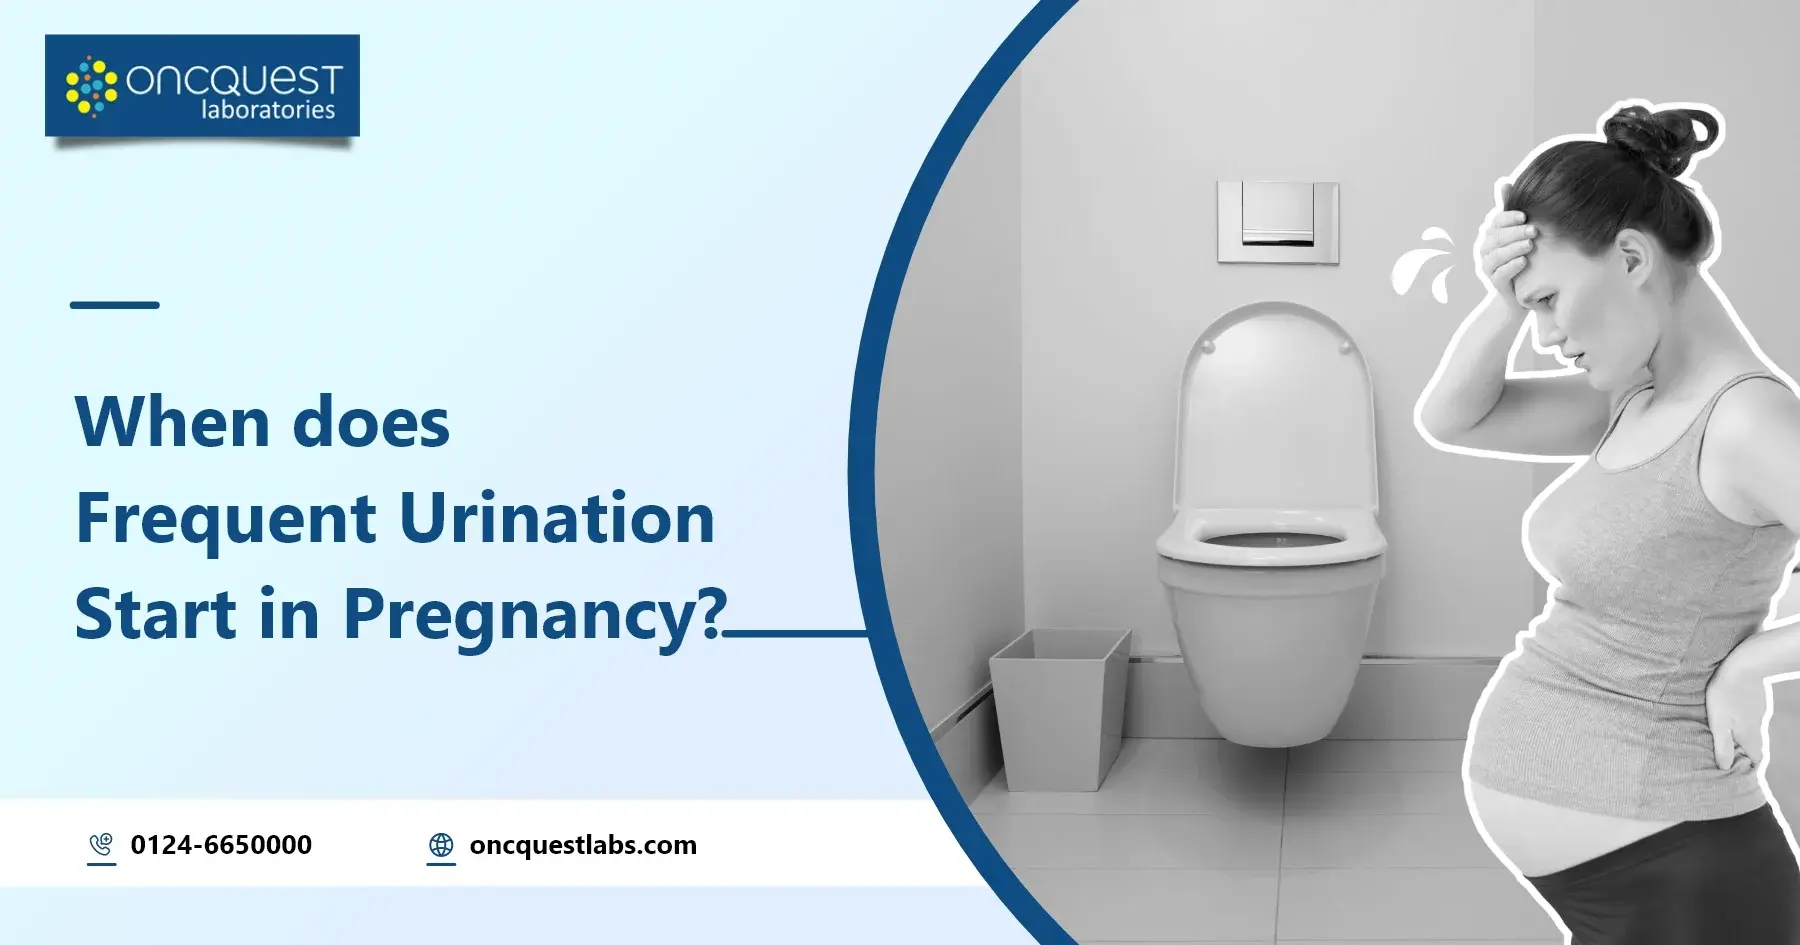 When Does Frequent Urination Start In Pregnancy?